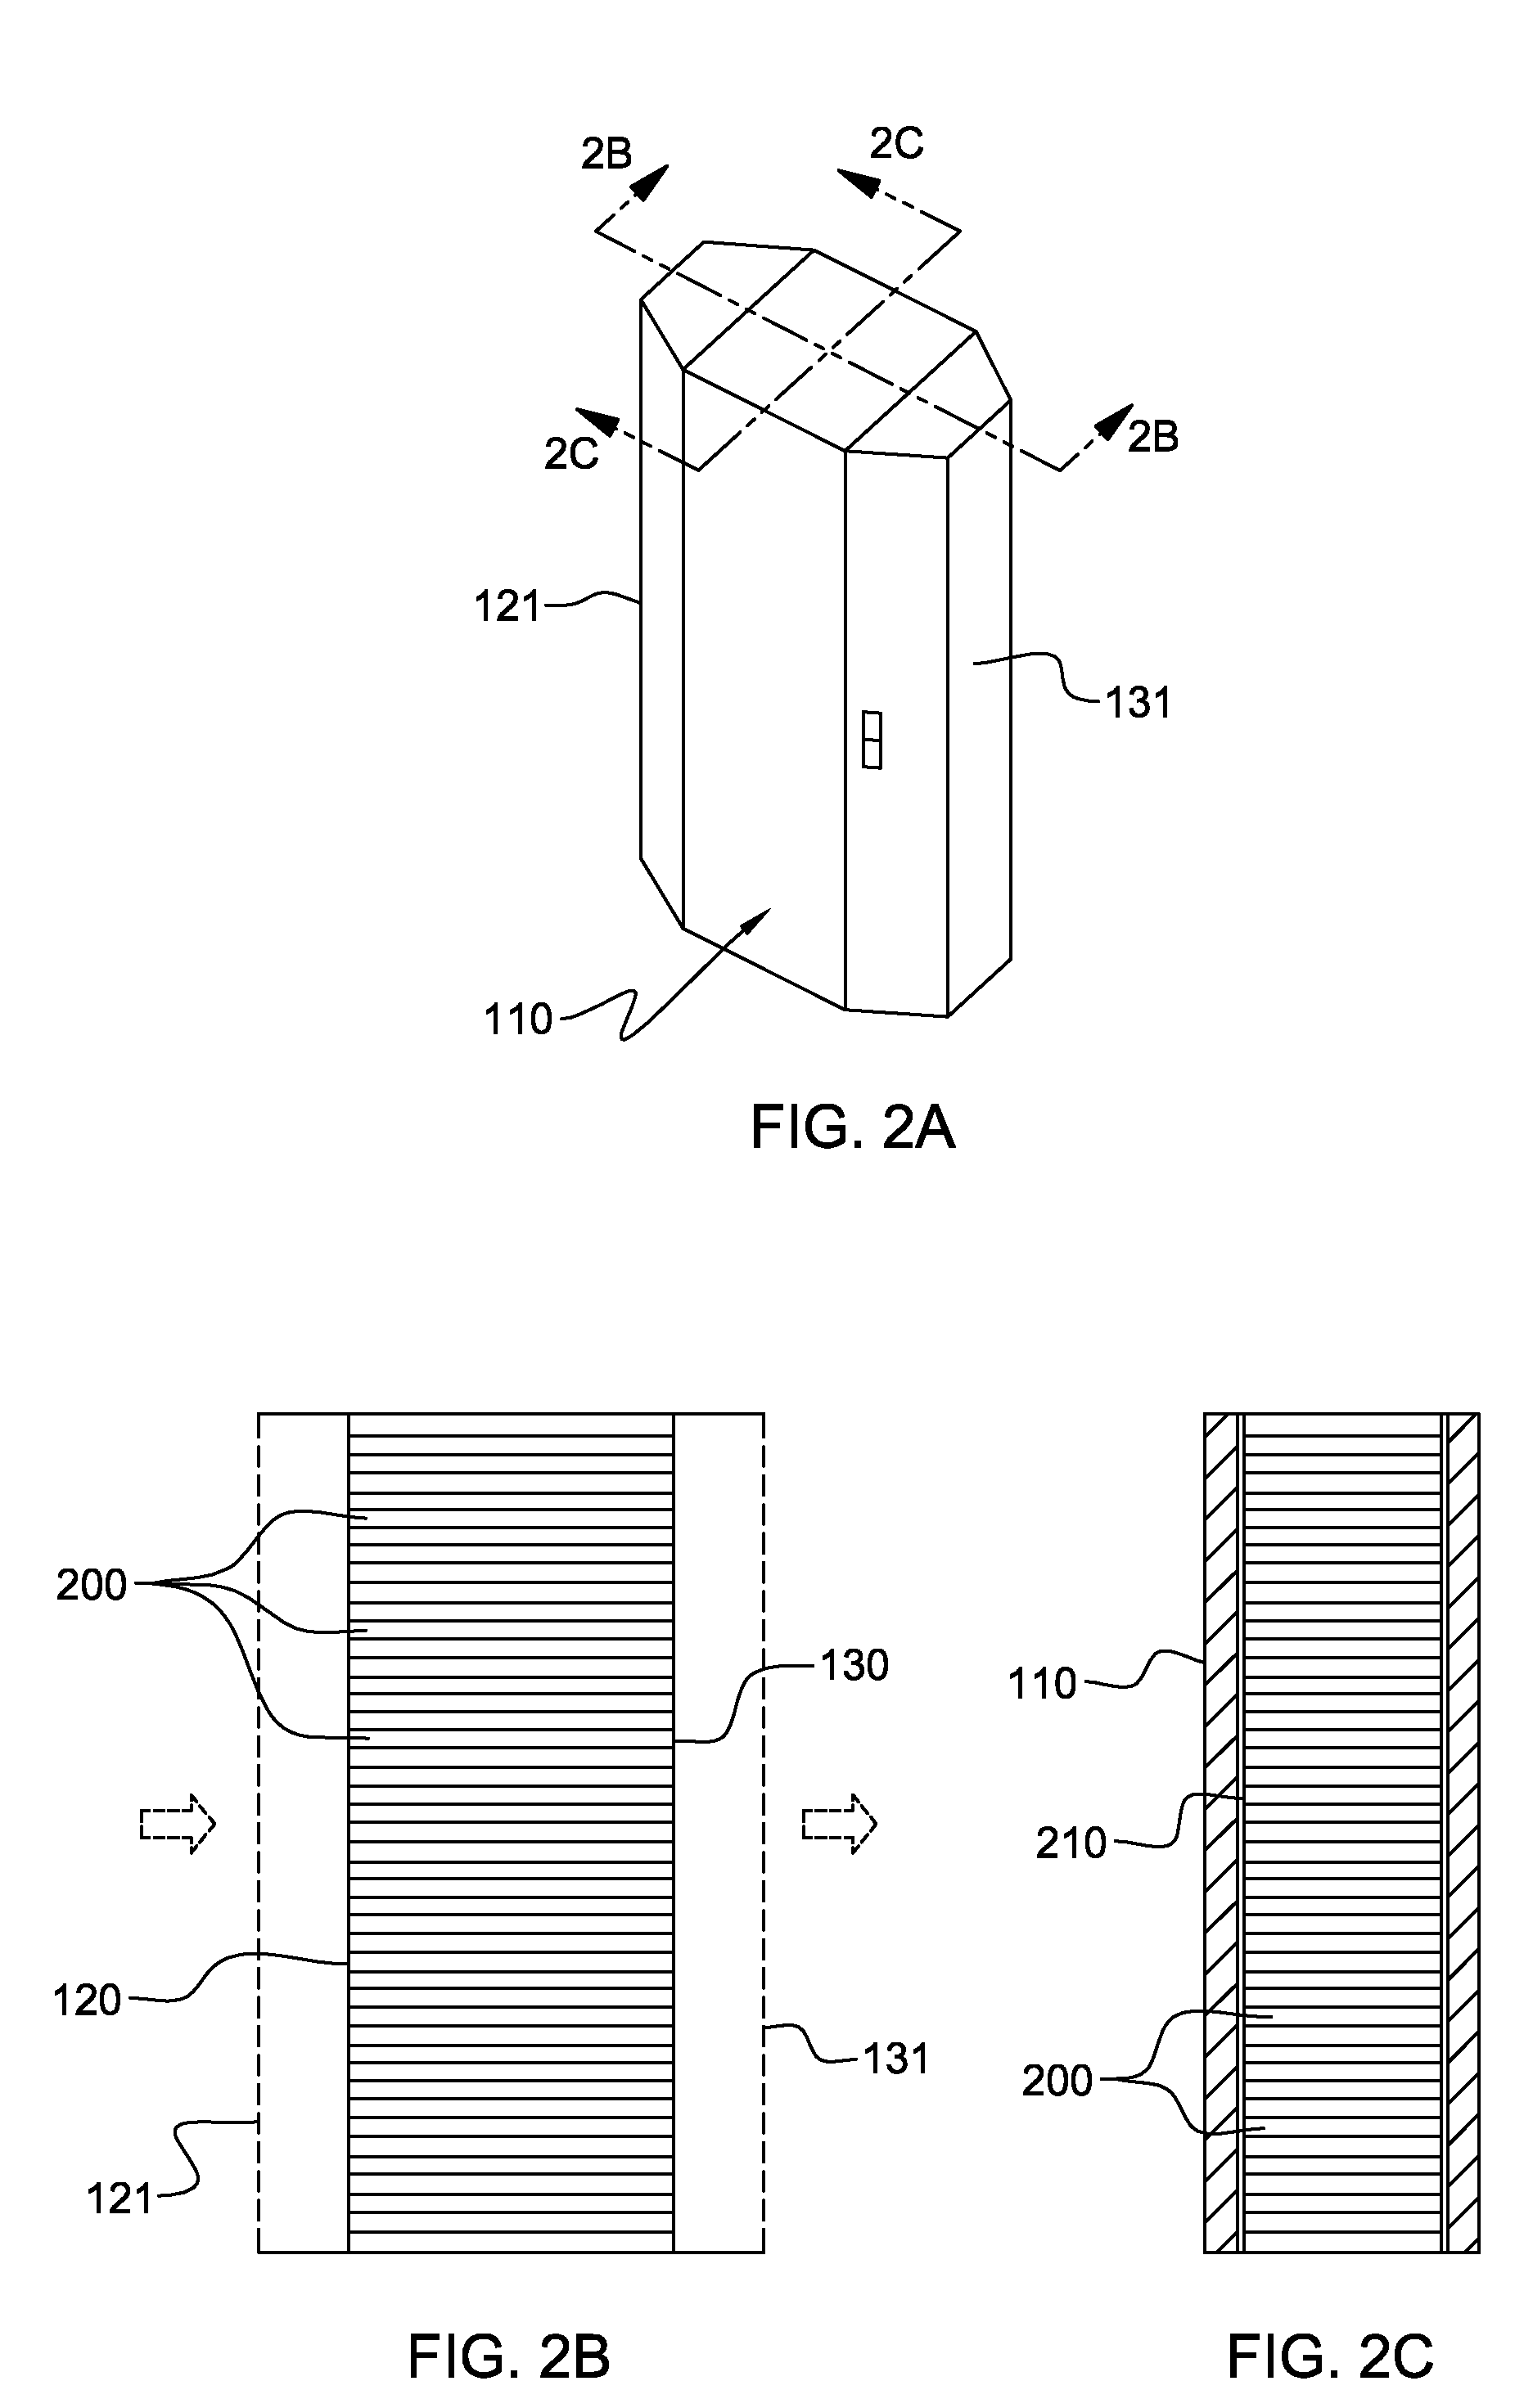 Monitoring method and system for determining rack airflow rate and rack power consumption